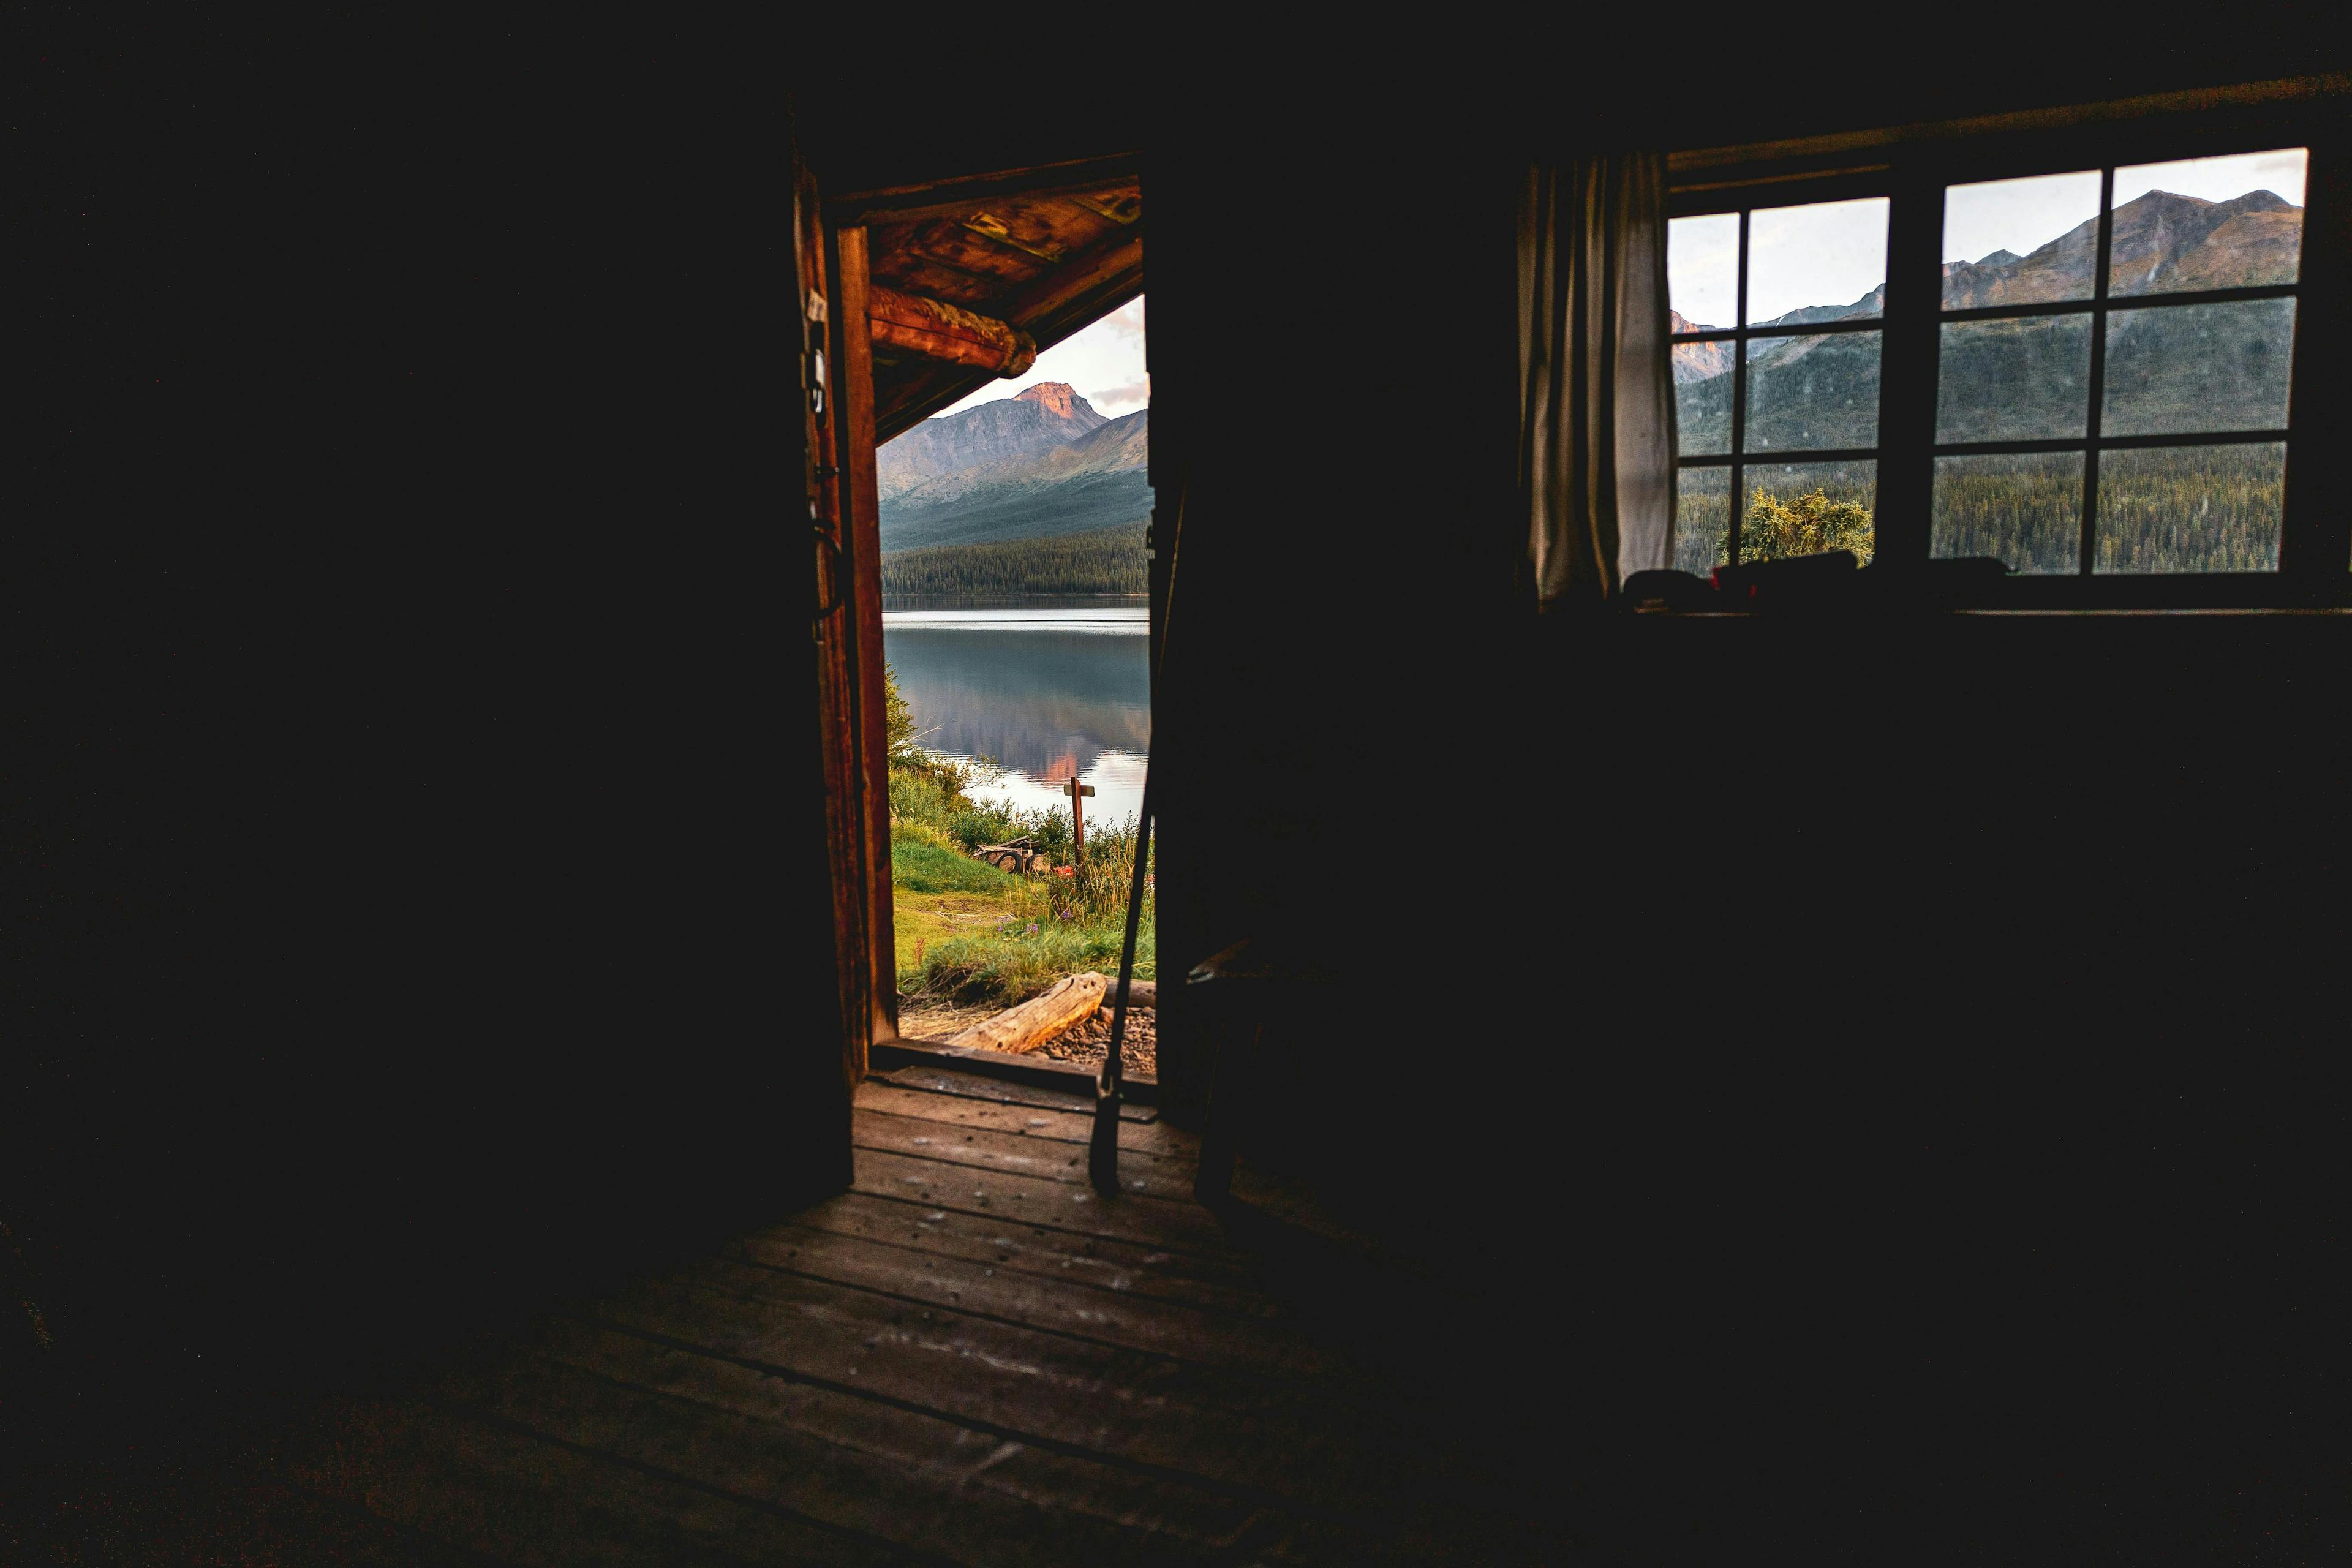 A view of a door and window from inside a cabin